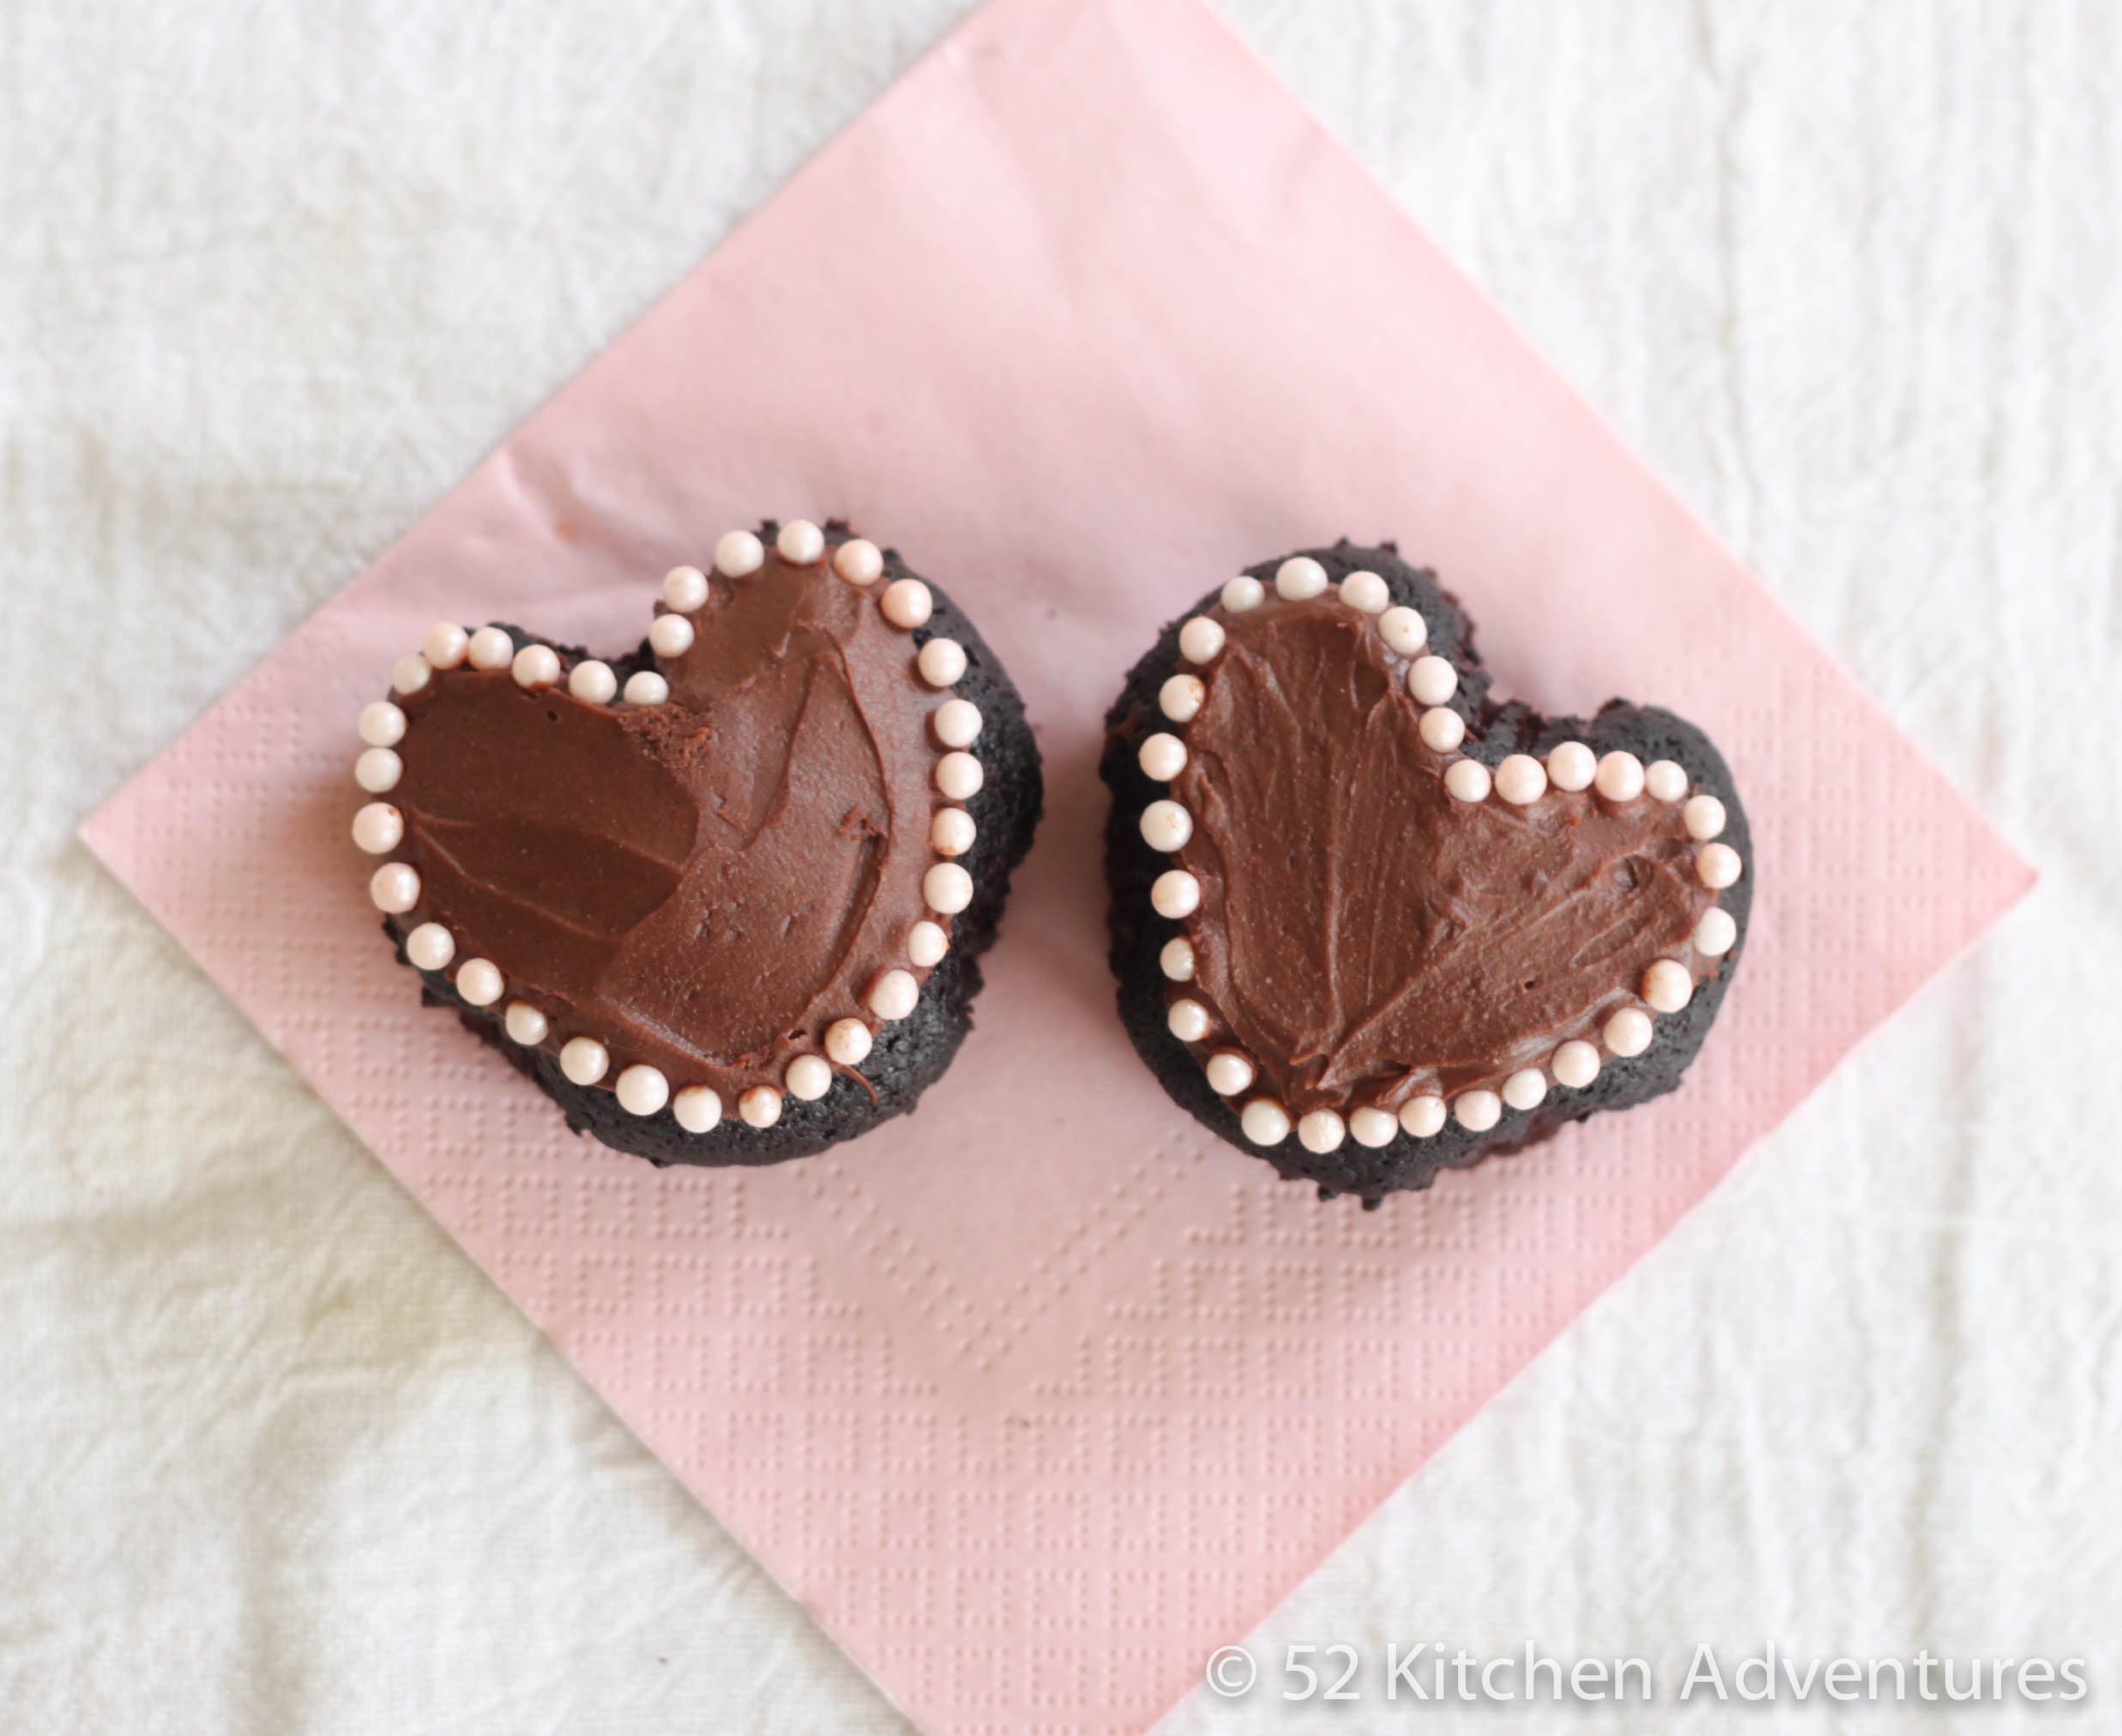 How to make heart shaped cupcakes